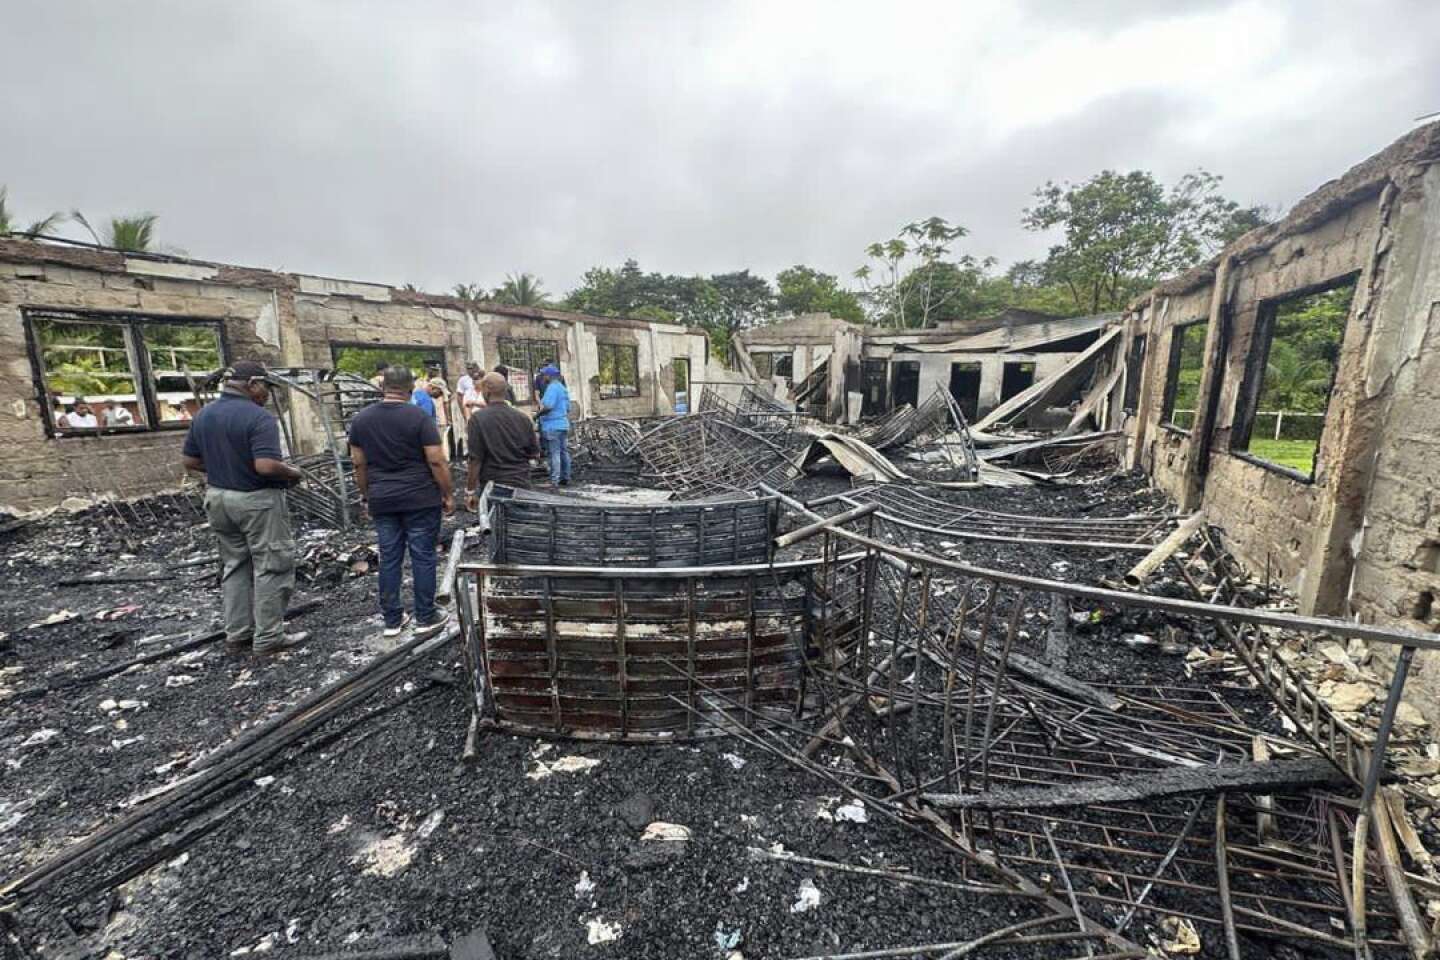 Nineteen youths die in school girl hostel fire, suspected to be “malicious” act